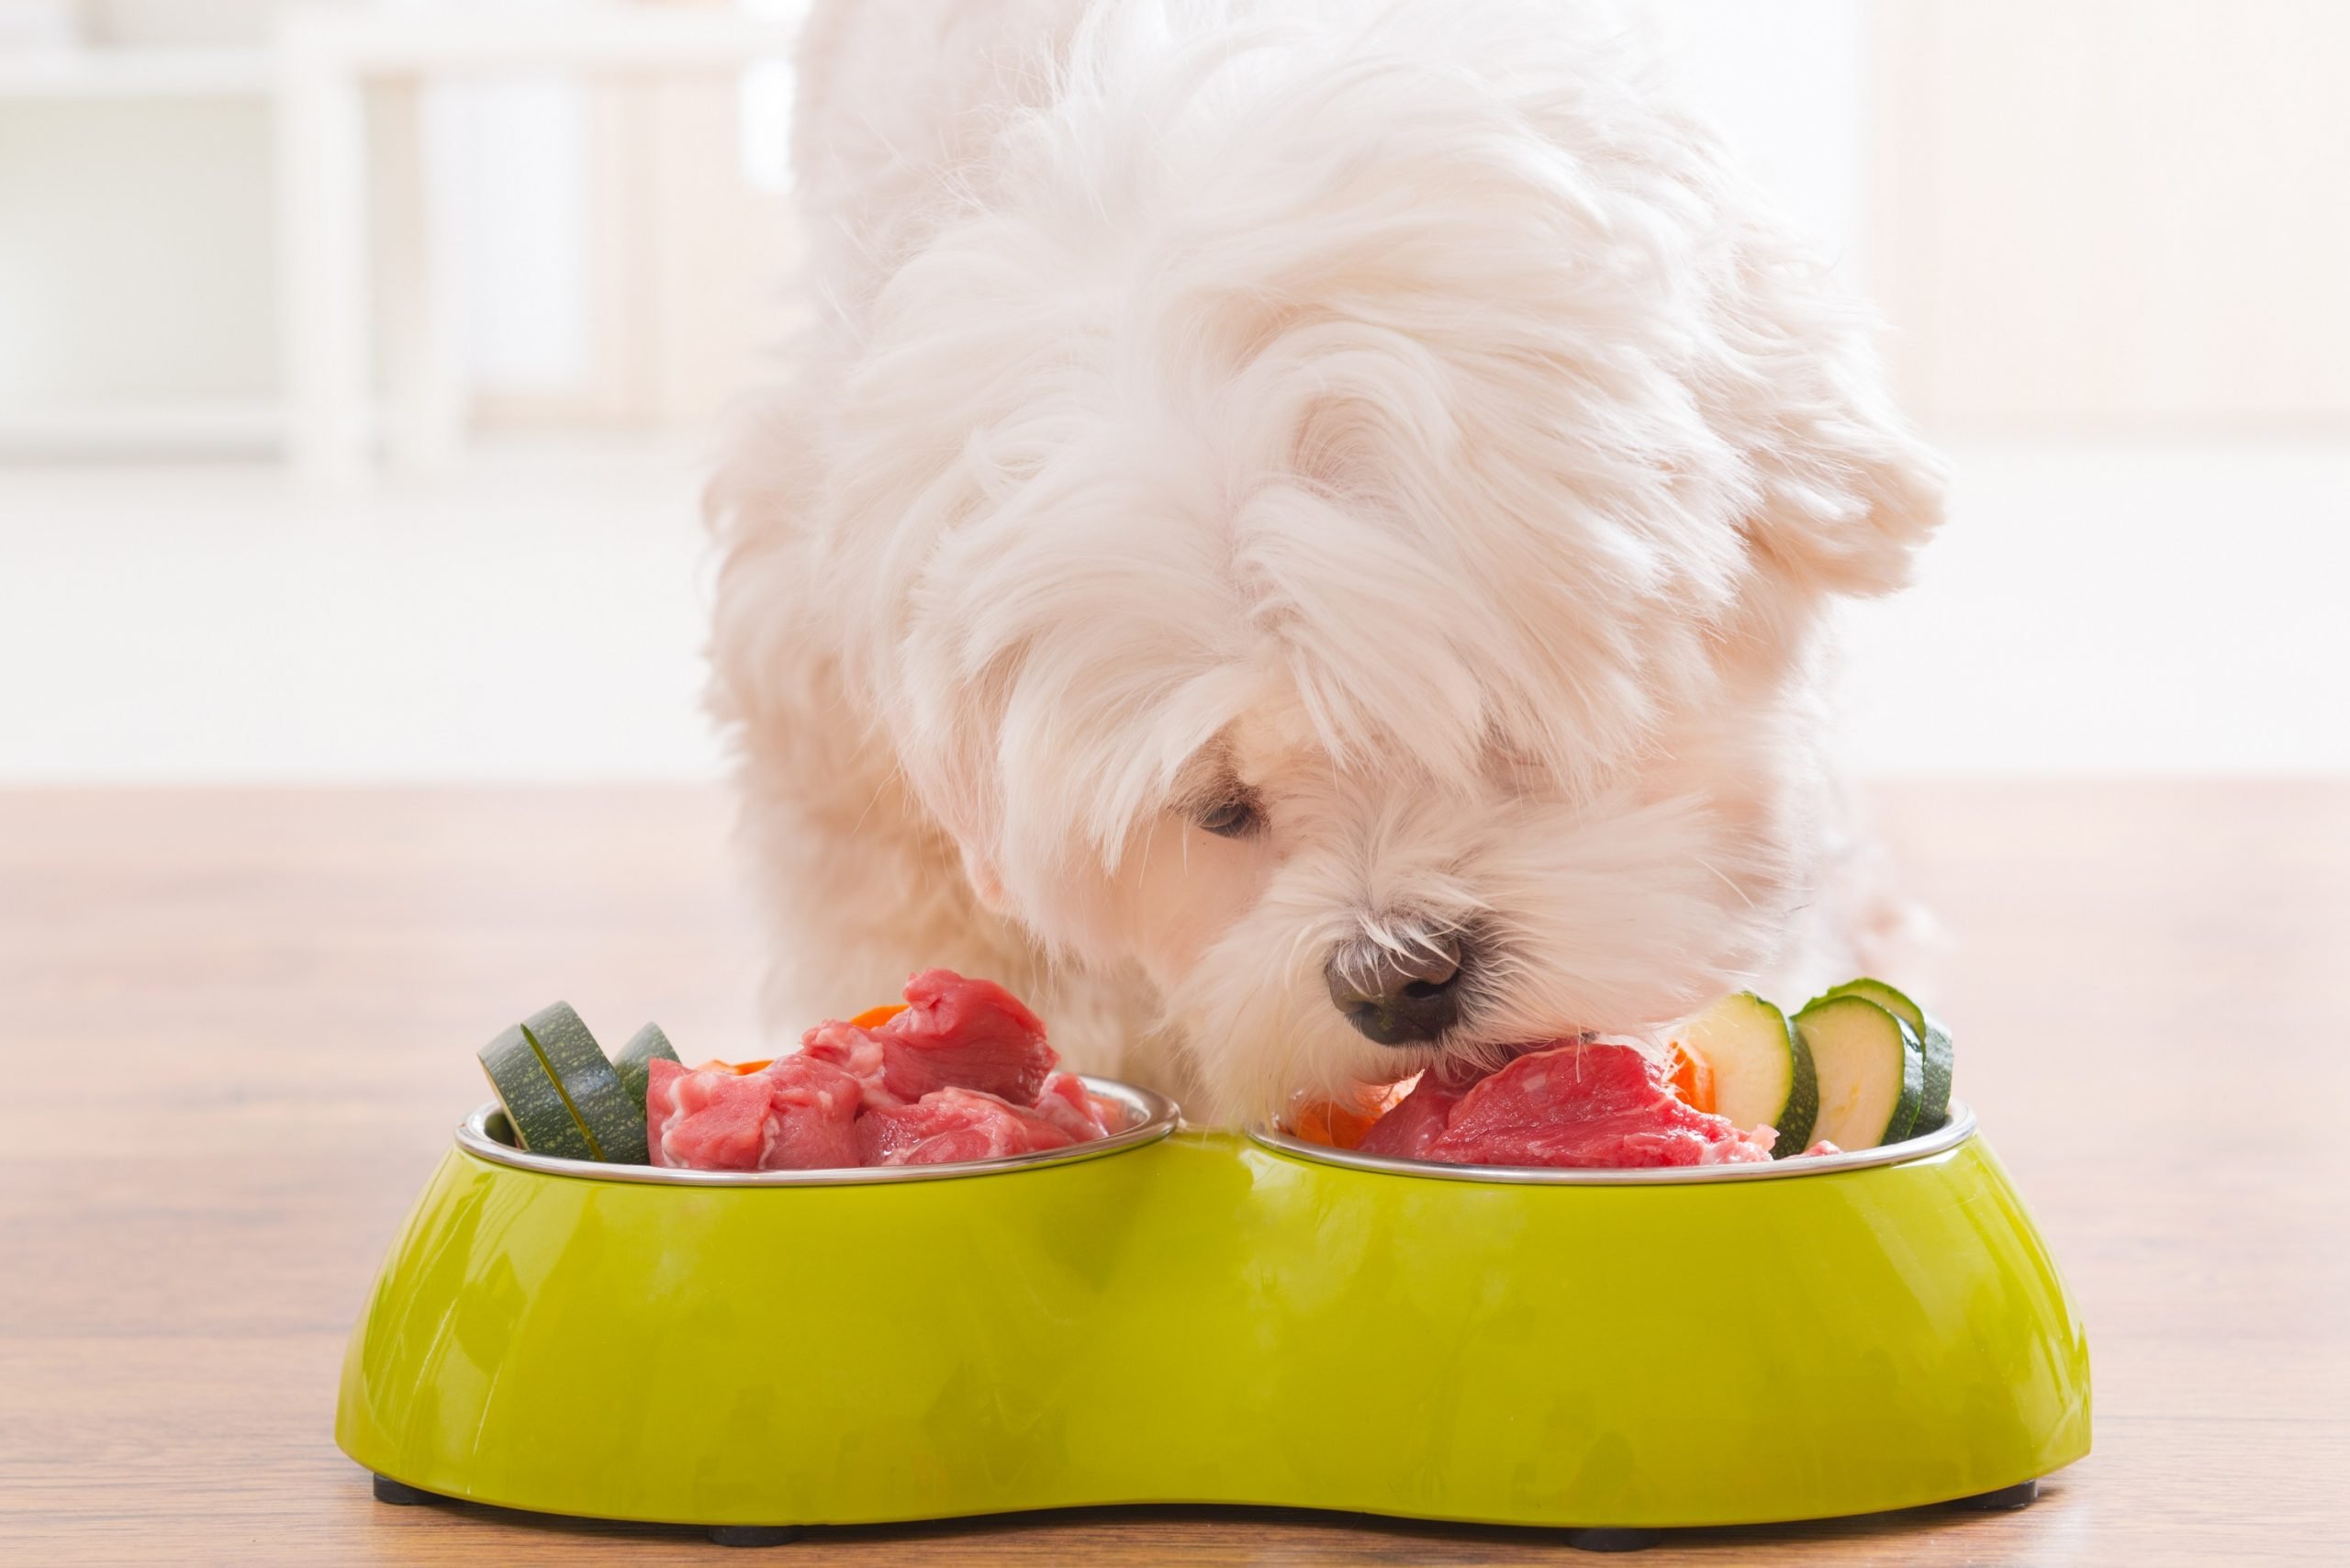 Raw Food Feeding Guide For Dog: How Much Raw Food To Feed A Dog Each Day